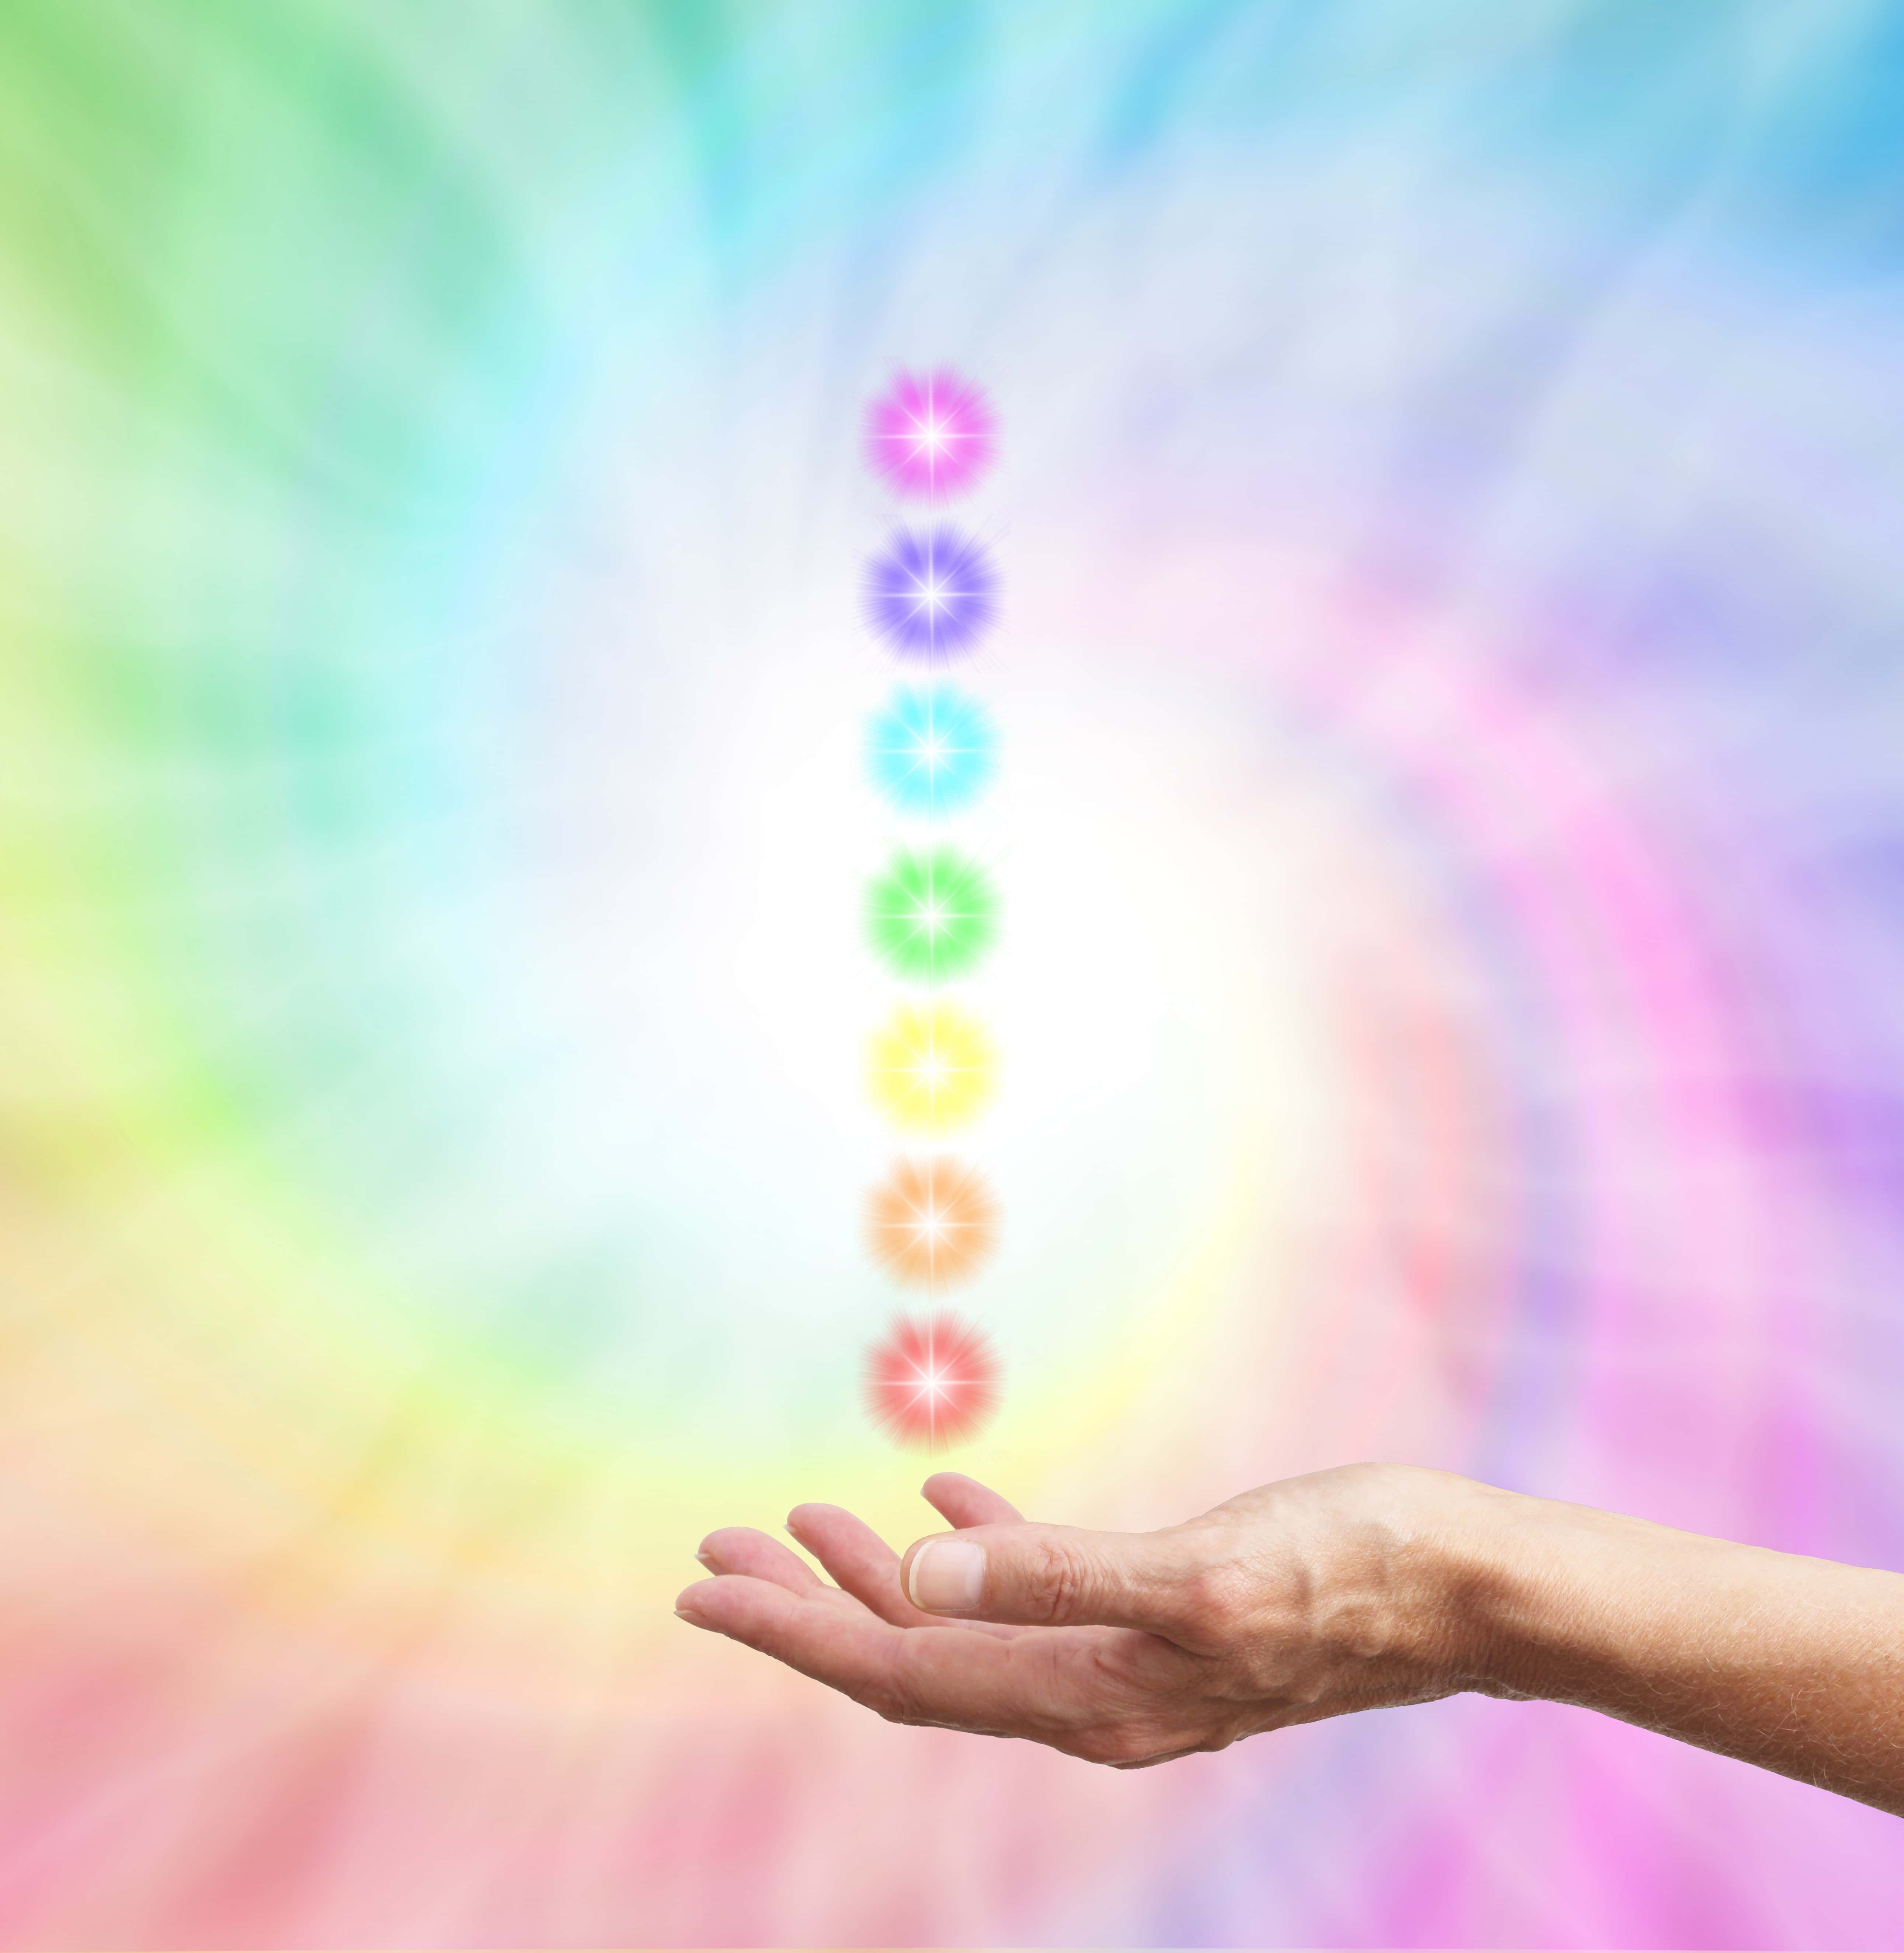 A rainbow of colors and the chakra icons with a hand reaching out.